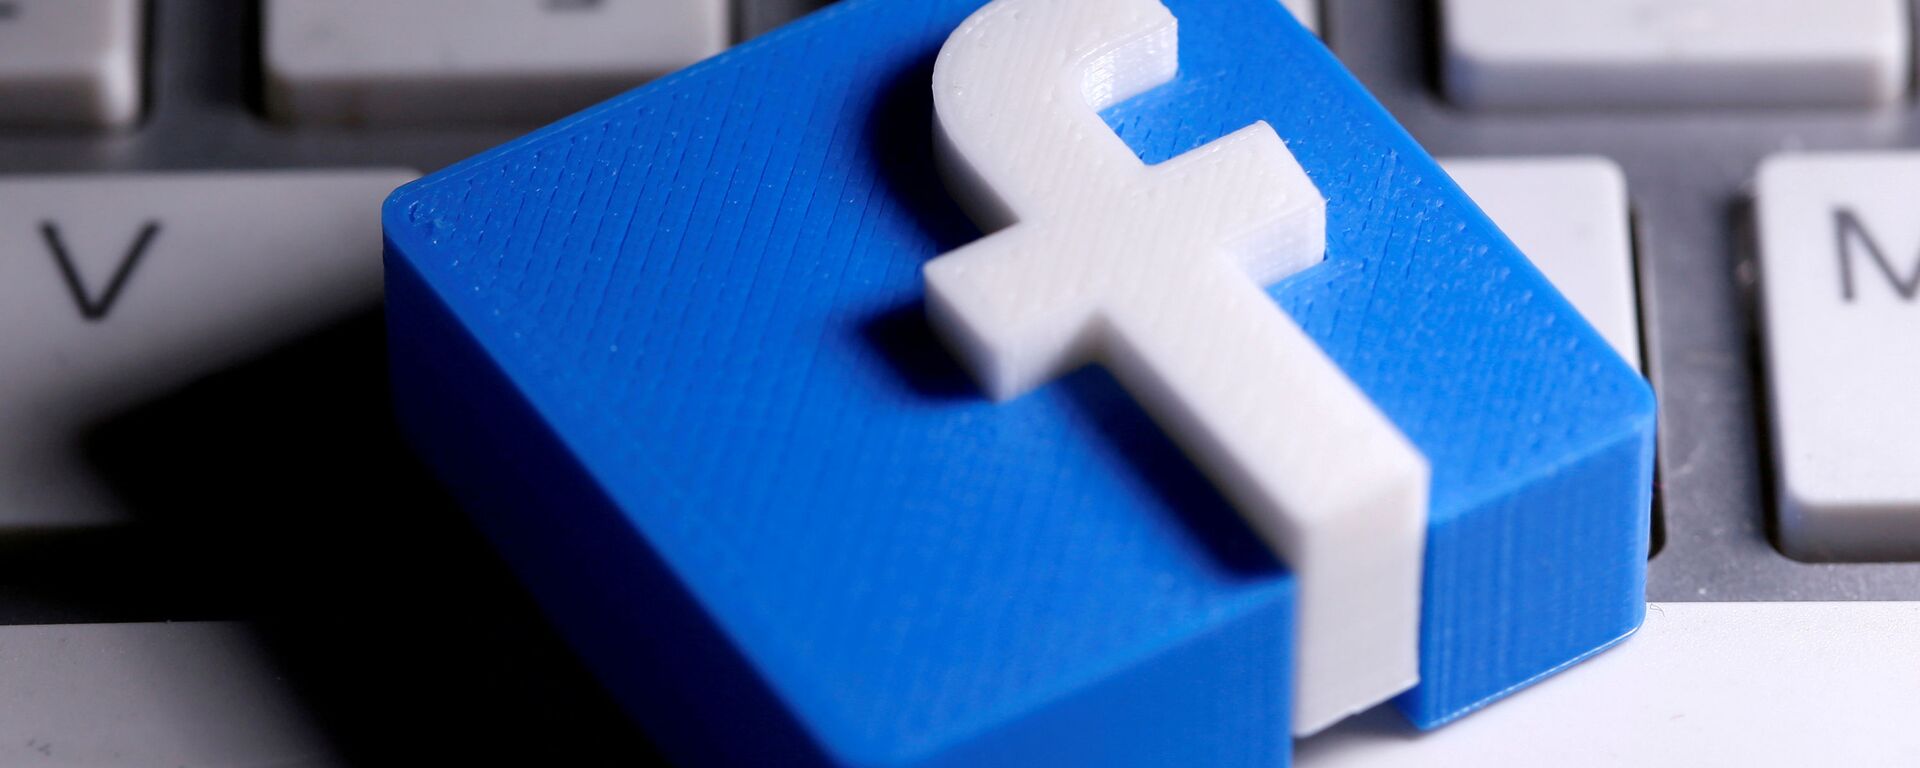 A 3D-printed Facebook logo is seen placed on a keyboard in this illustration taken March 25, 2020.  - Sputnik International, 1920